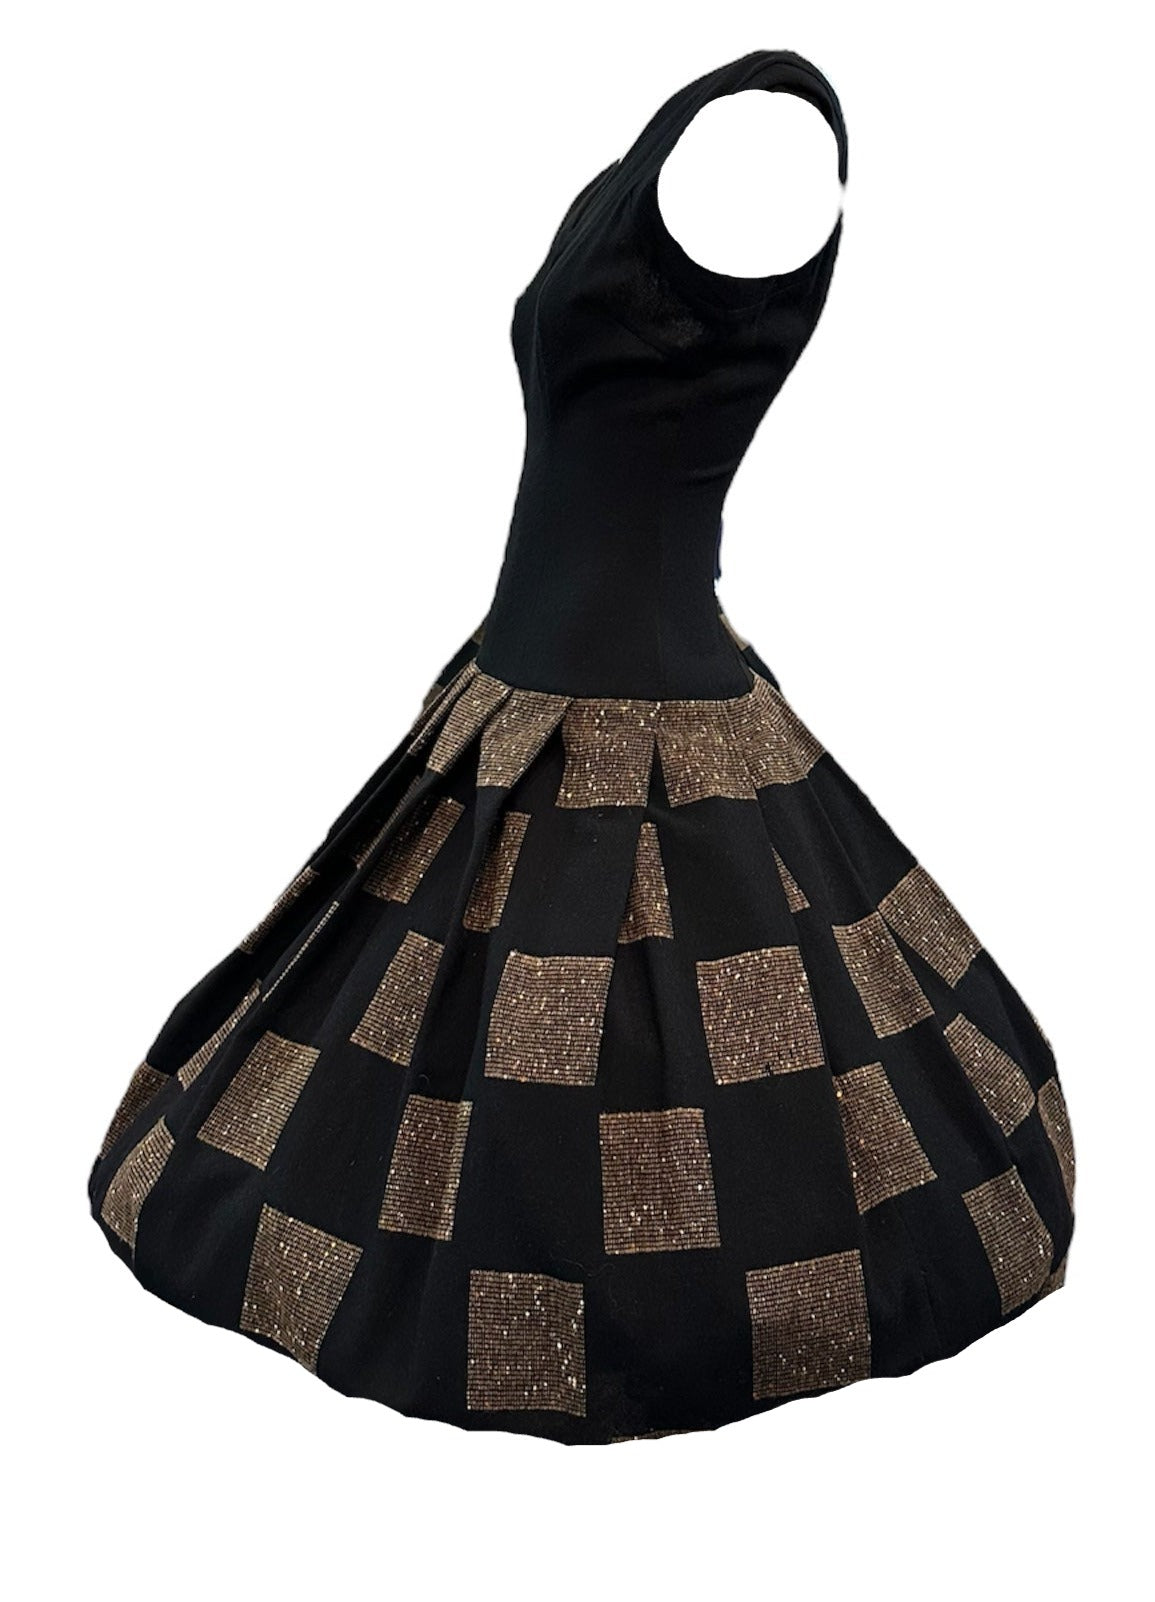  Hal-Mar 50s Madmen Flecked Brown and Black Checkerboard Wool  Dress Ensemble DRESS SIDE 4 of 7